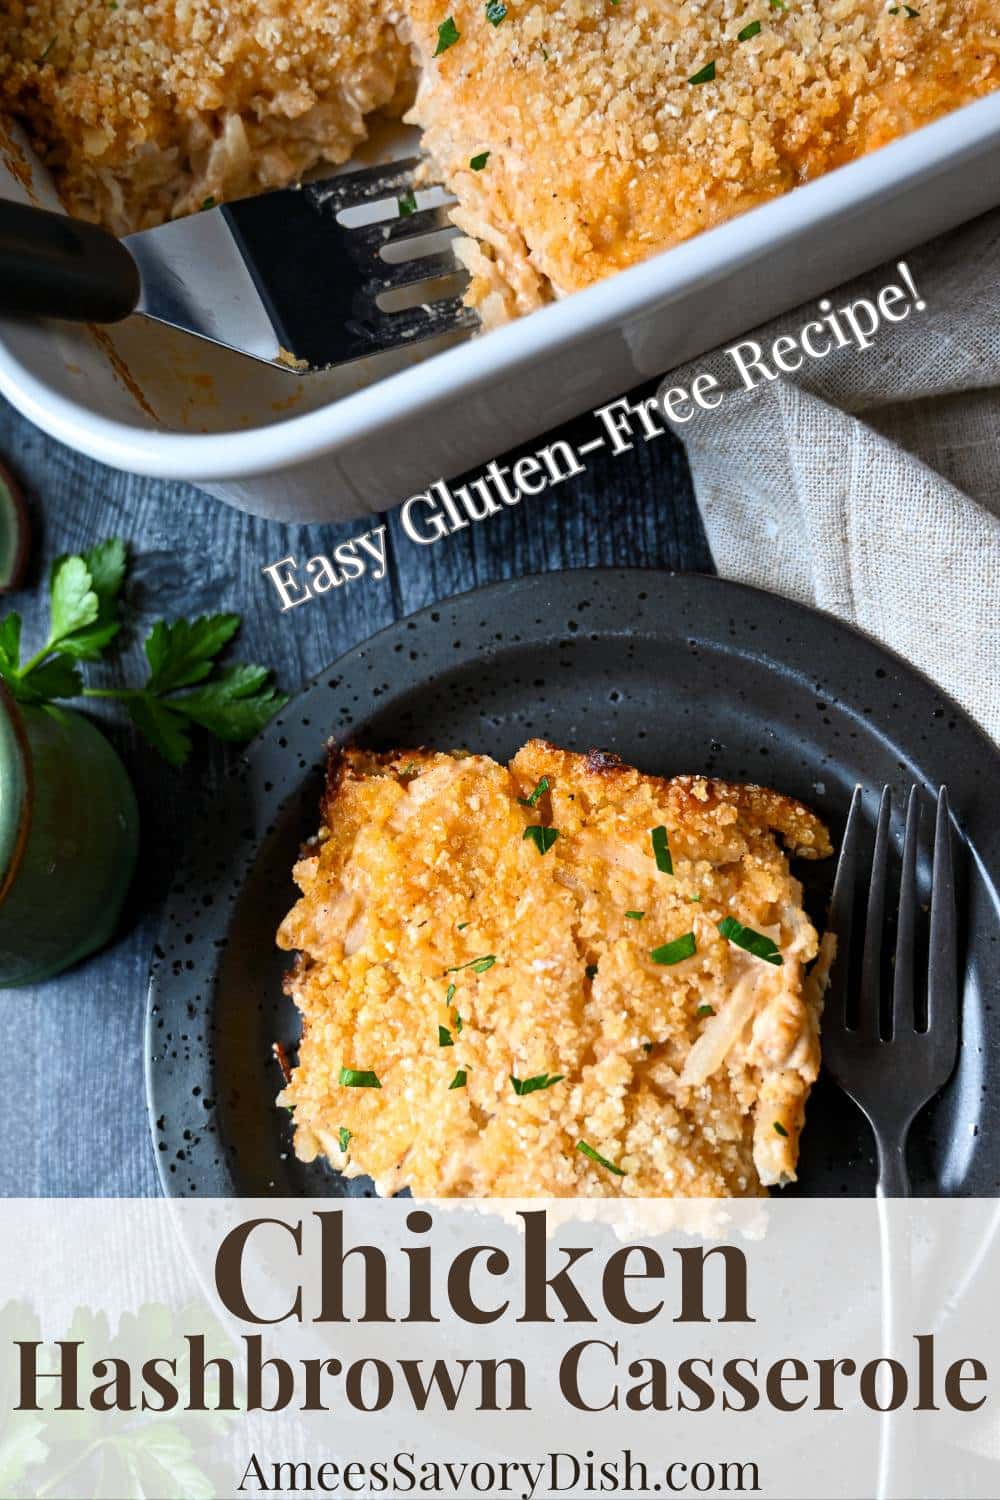 This delicious, protein-packed, chicken hashbrown casserole recipe is quick and easy to make and loaded with flavor! A family favorite! via @Ameessavorydish